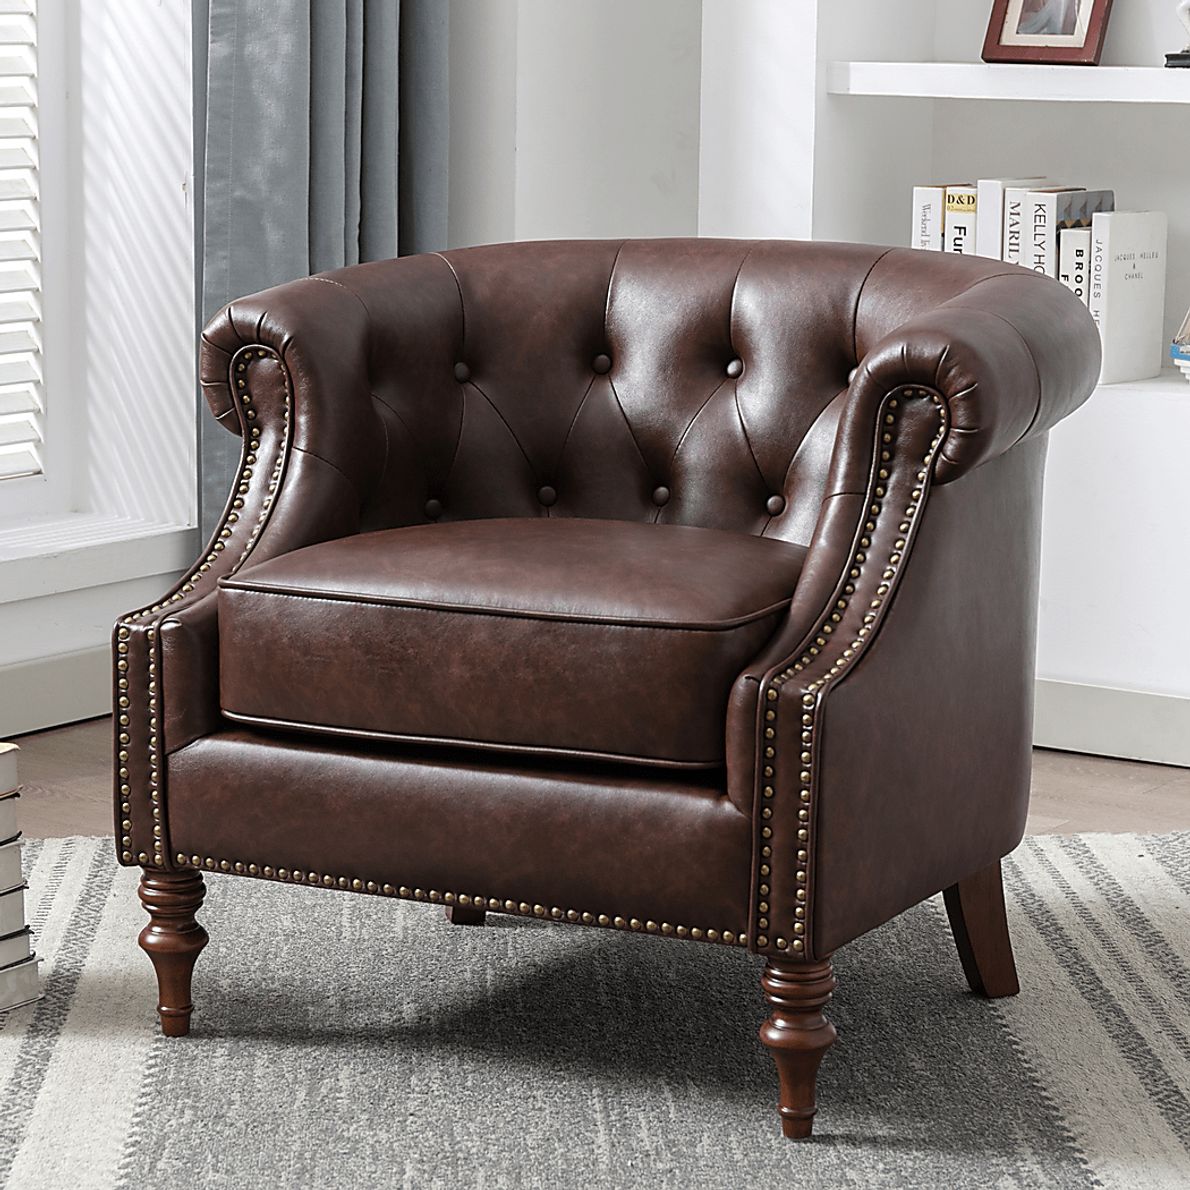 Pentro Accent Chair